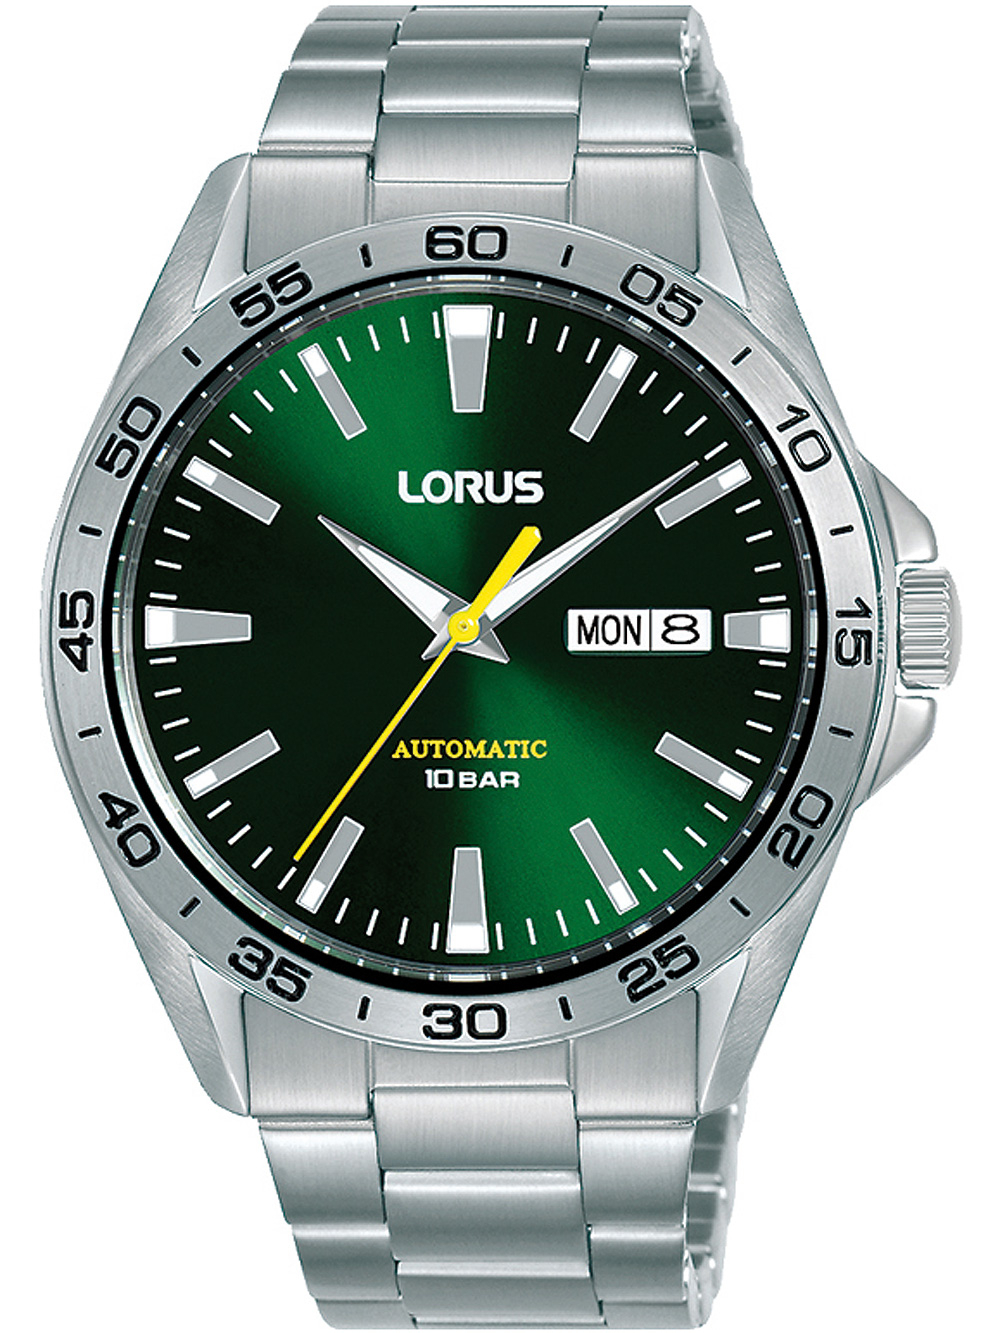 free secure! buy & watches: LORUS cheap, postage